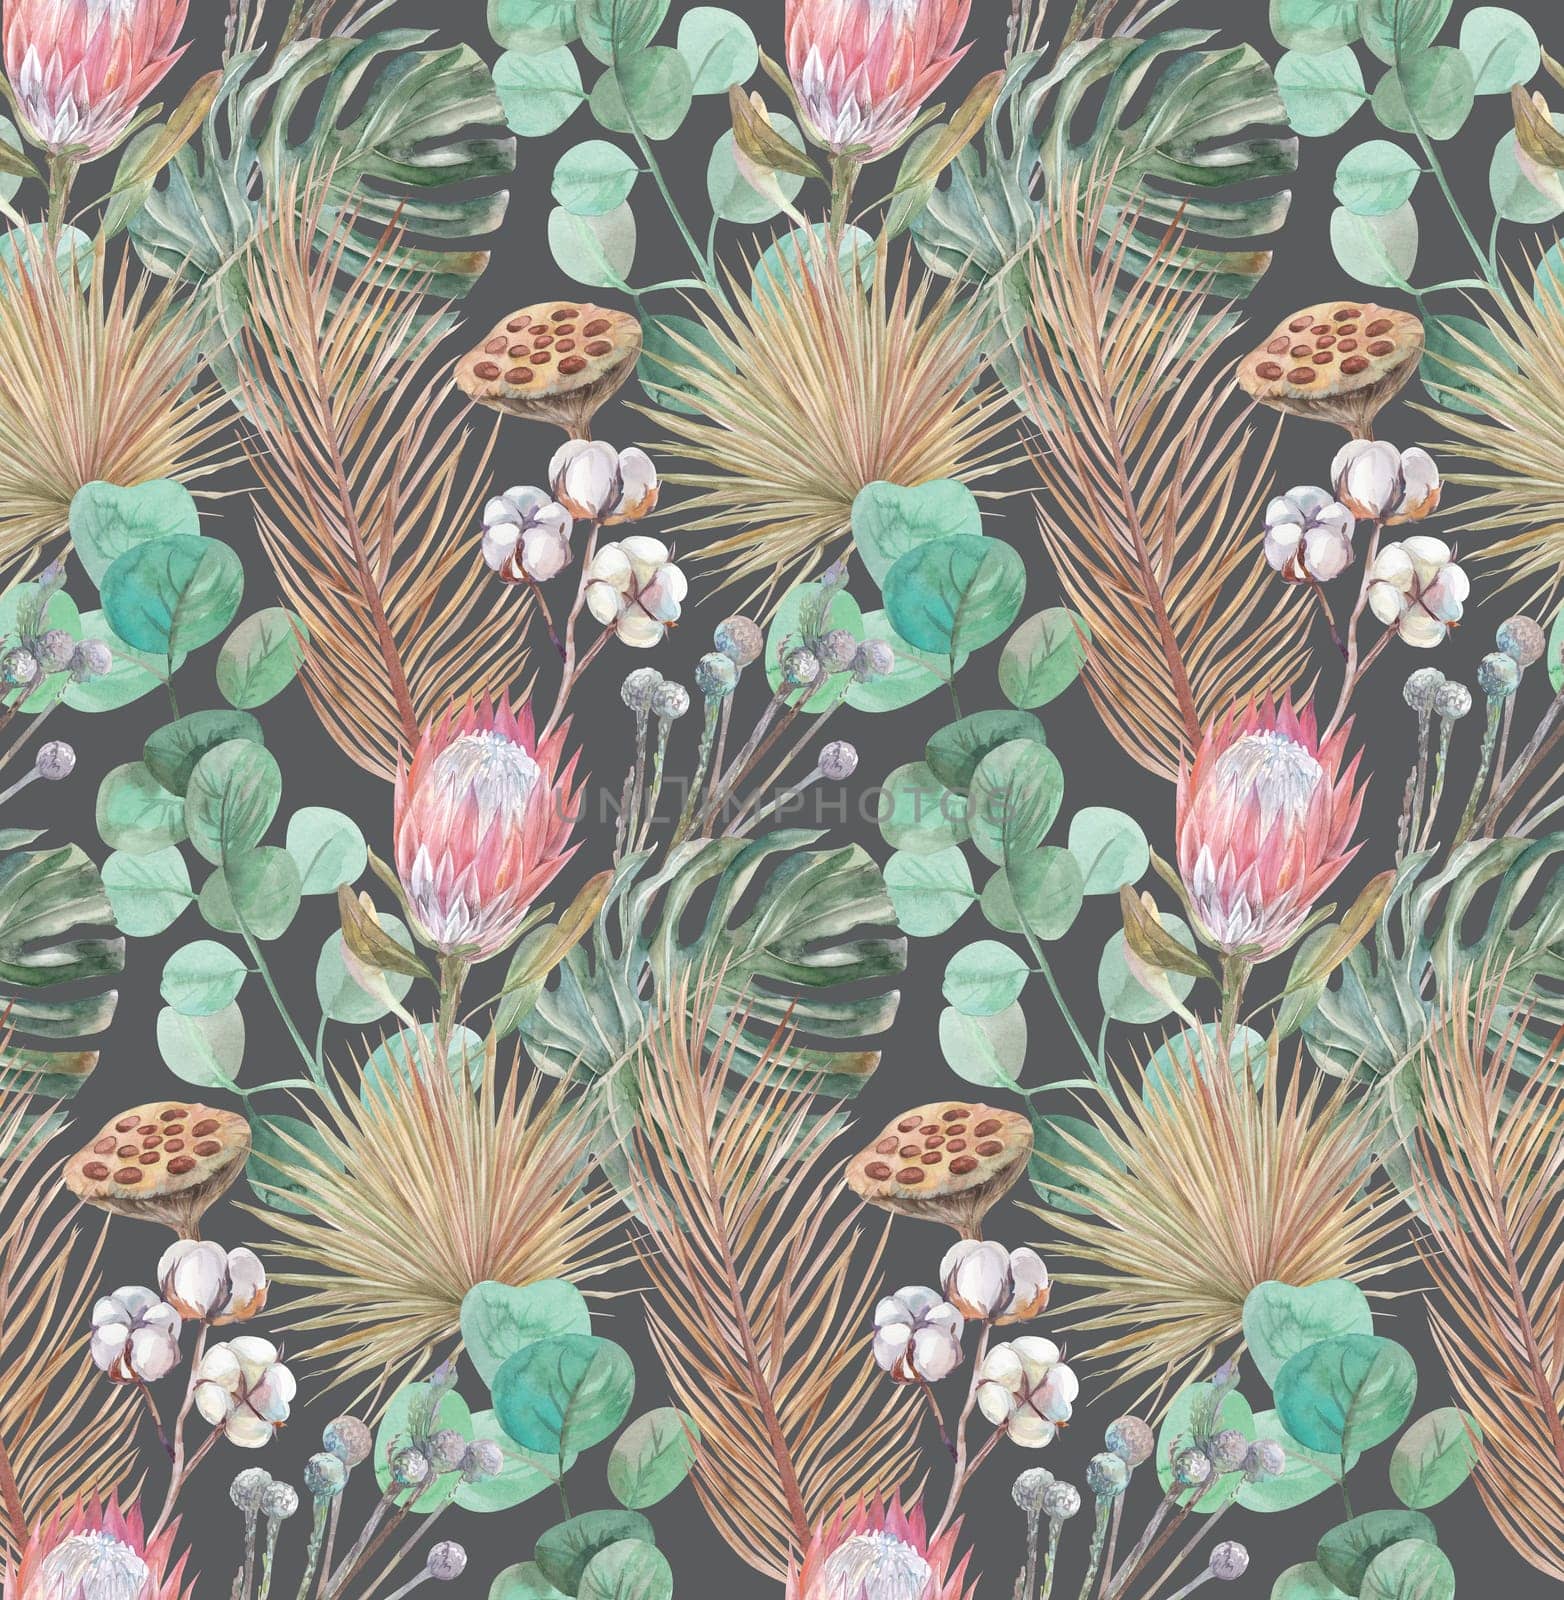 watercolor modern boho pattern with tropical dried flowers and flowers of proteus and monstera n on a gray background for textiles and surface design